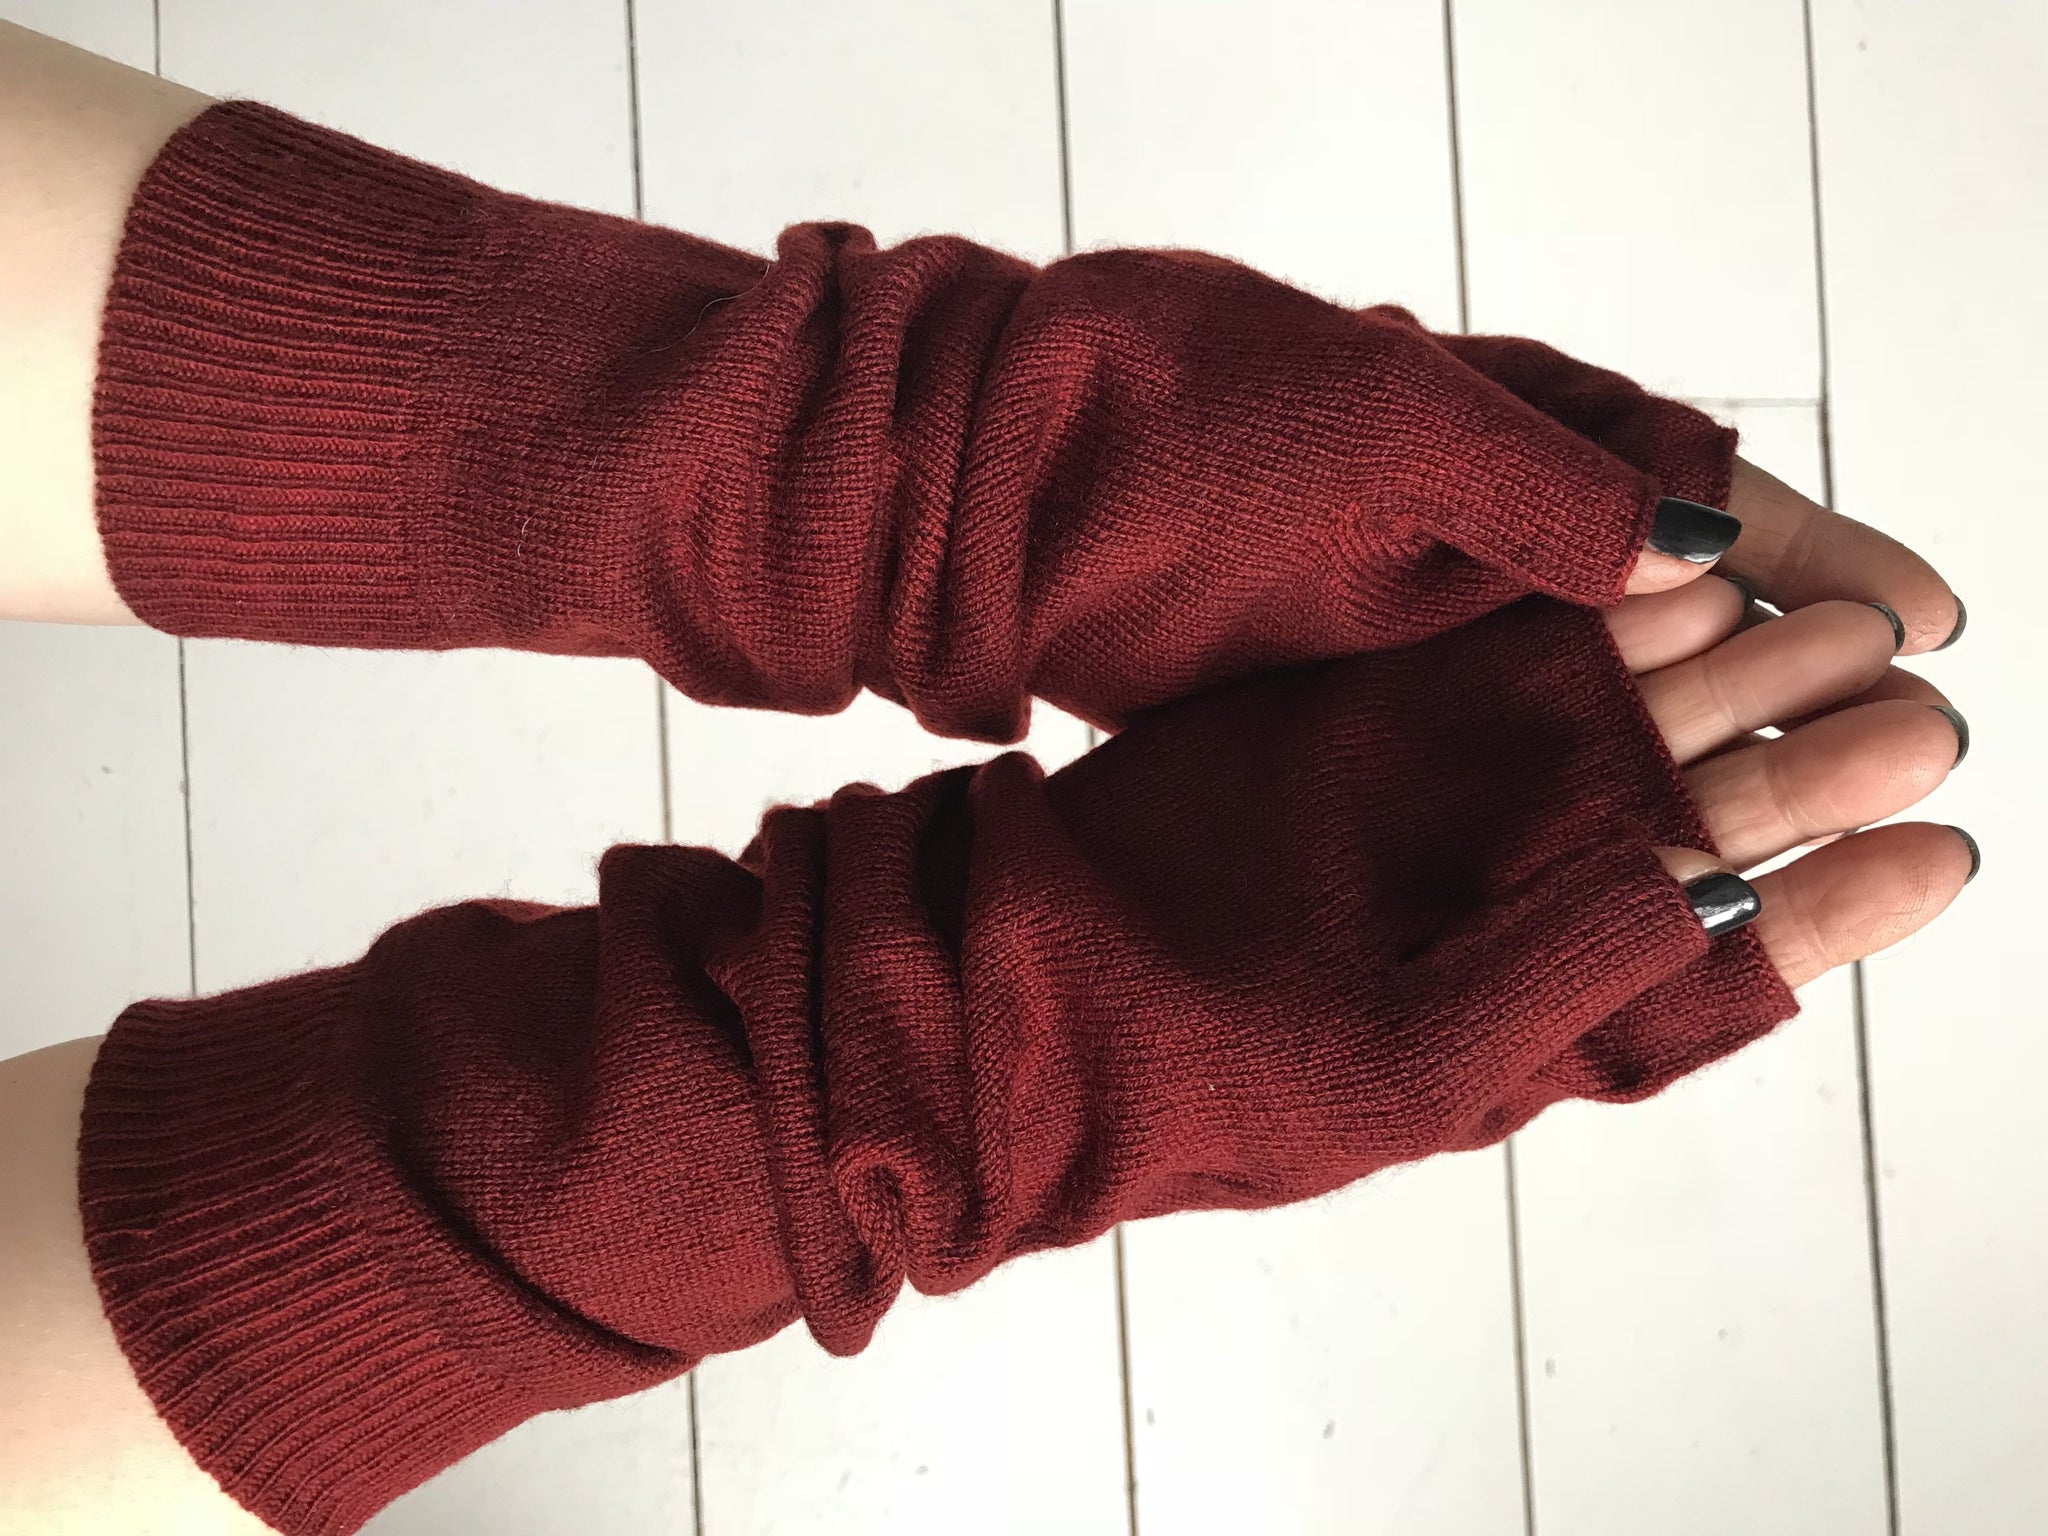 WDTS - Arm warmers in red berry wool